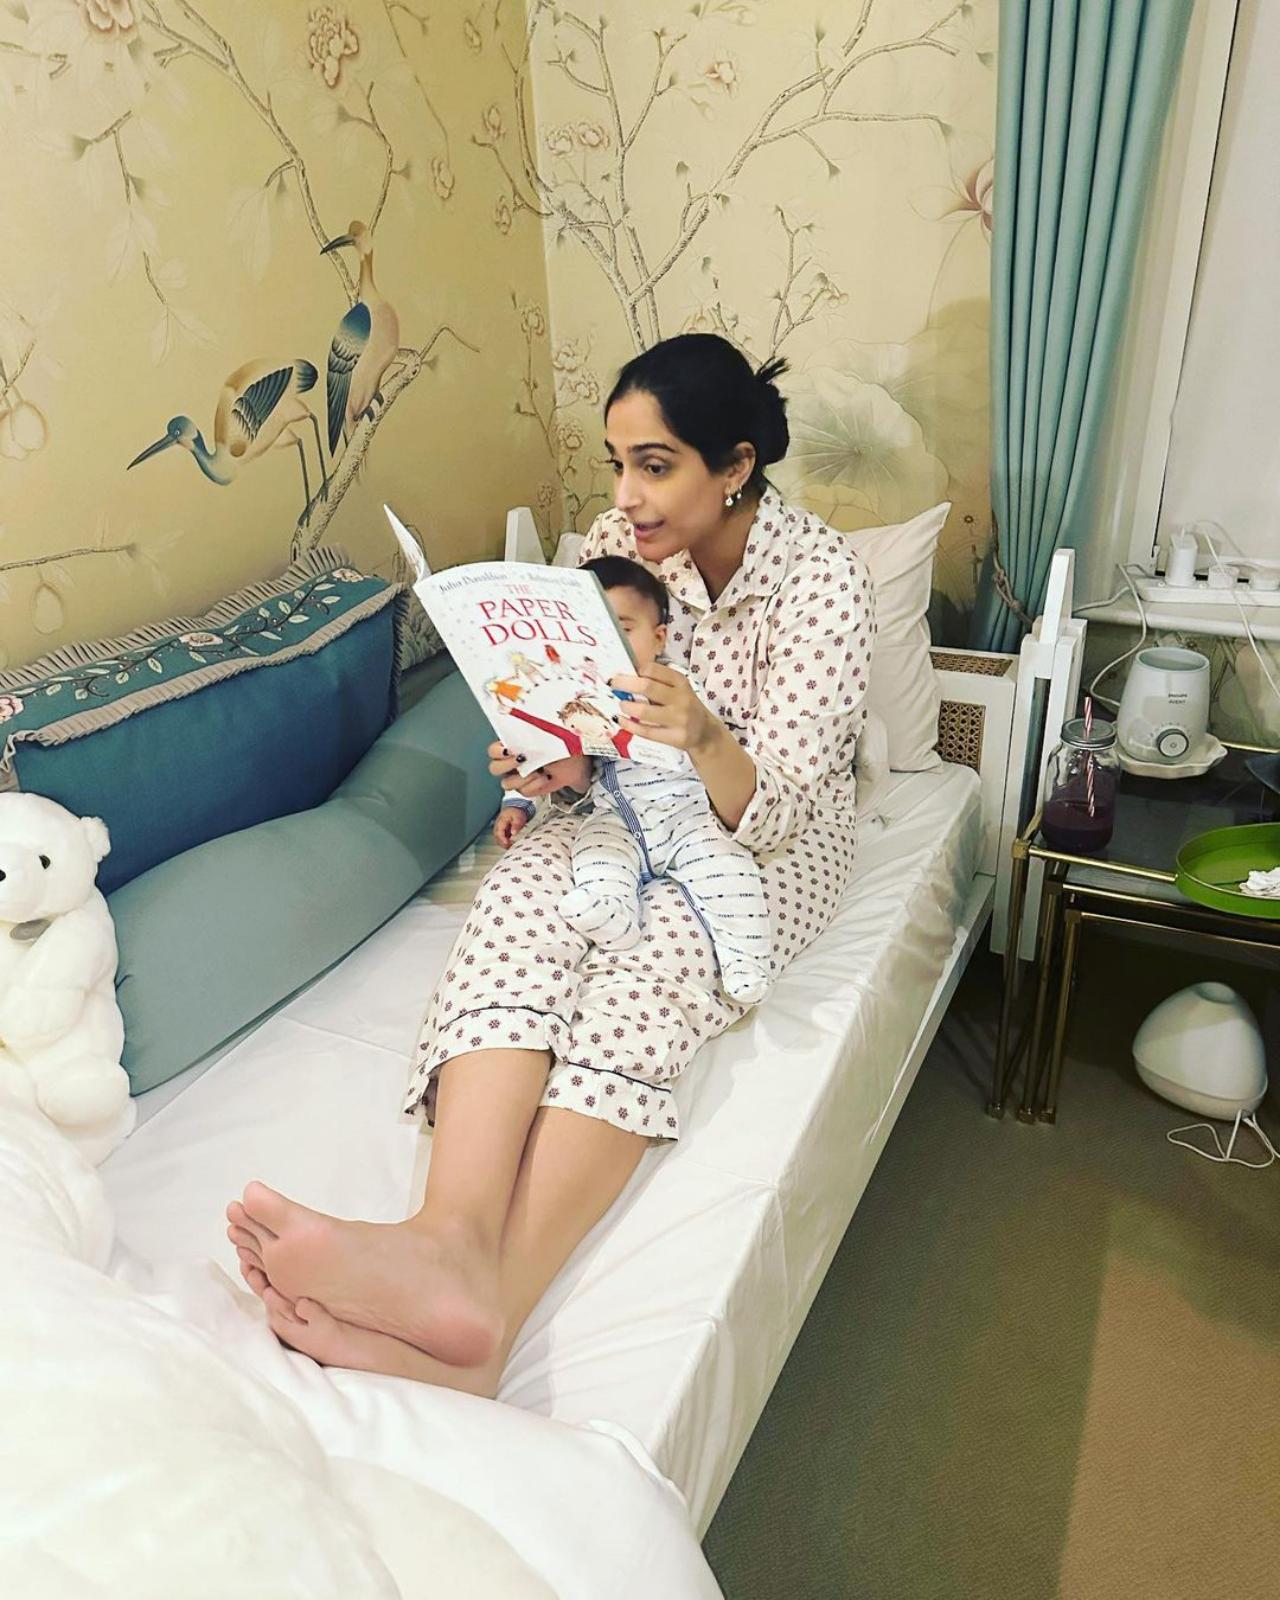 The actress can be seen reading to her son. The book 'Paper Dolls' even caught actress Kareena Kapoor Khan's eye as she comments, 